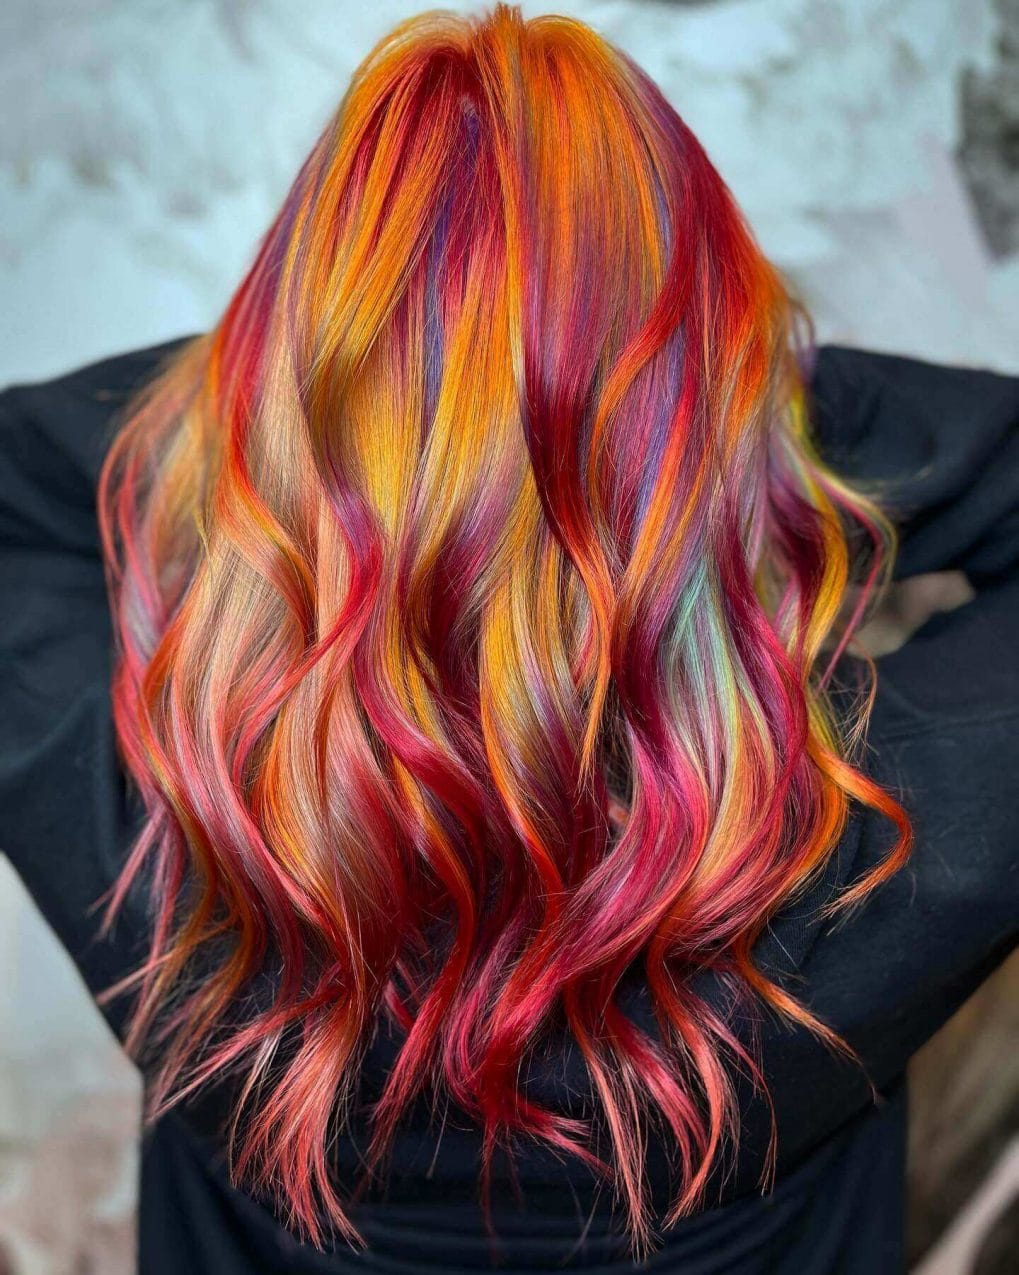 Sunset warmth in orange, red, and yellow long waves